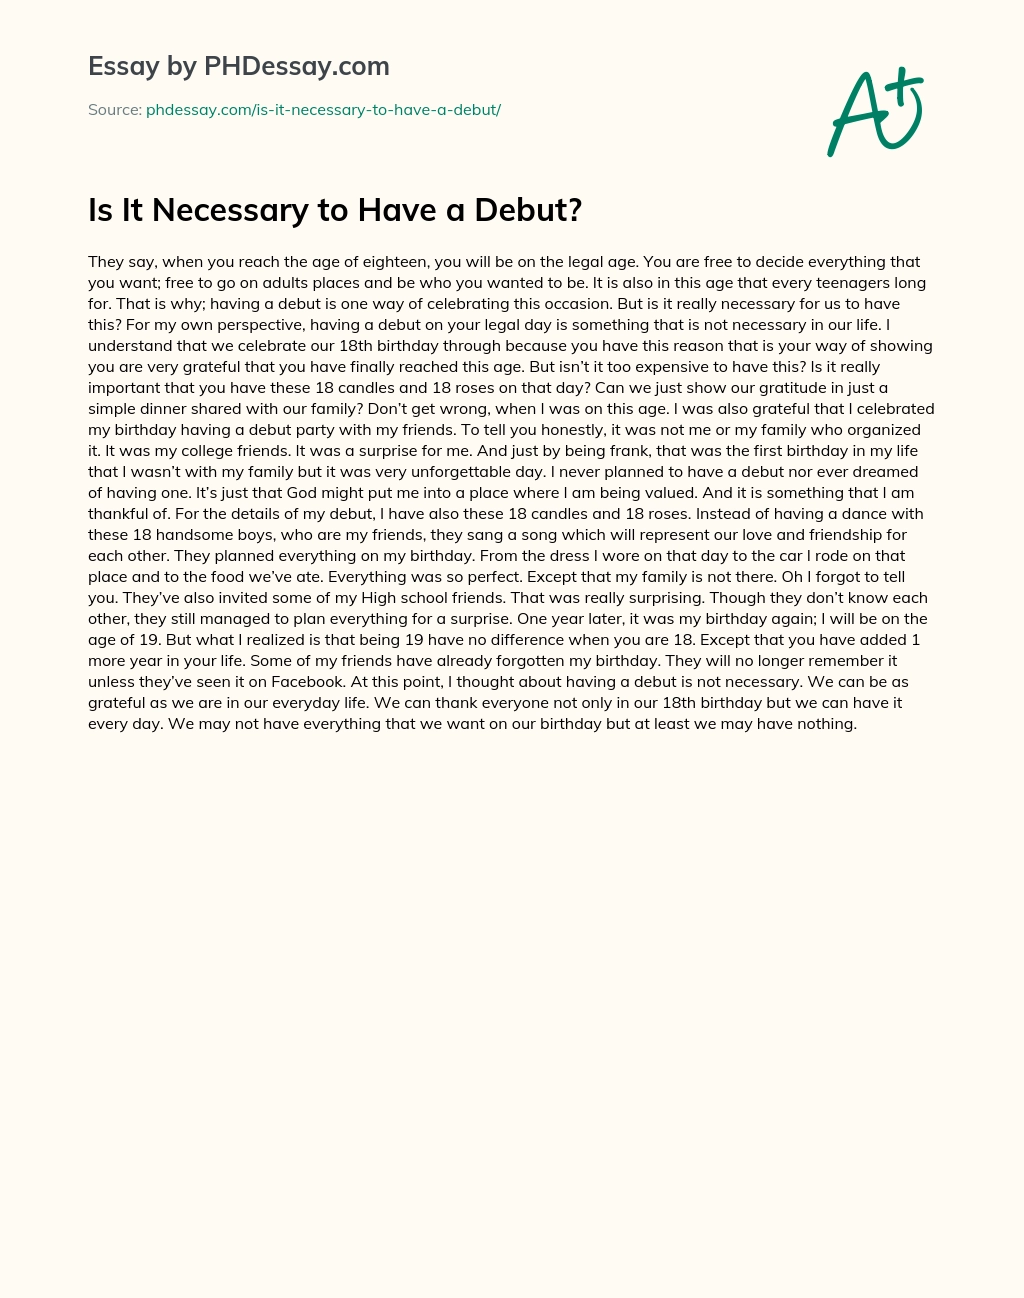 Is It Necessary to Have a Debut? essay